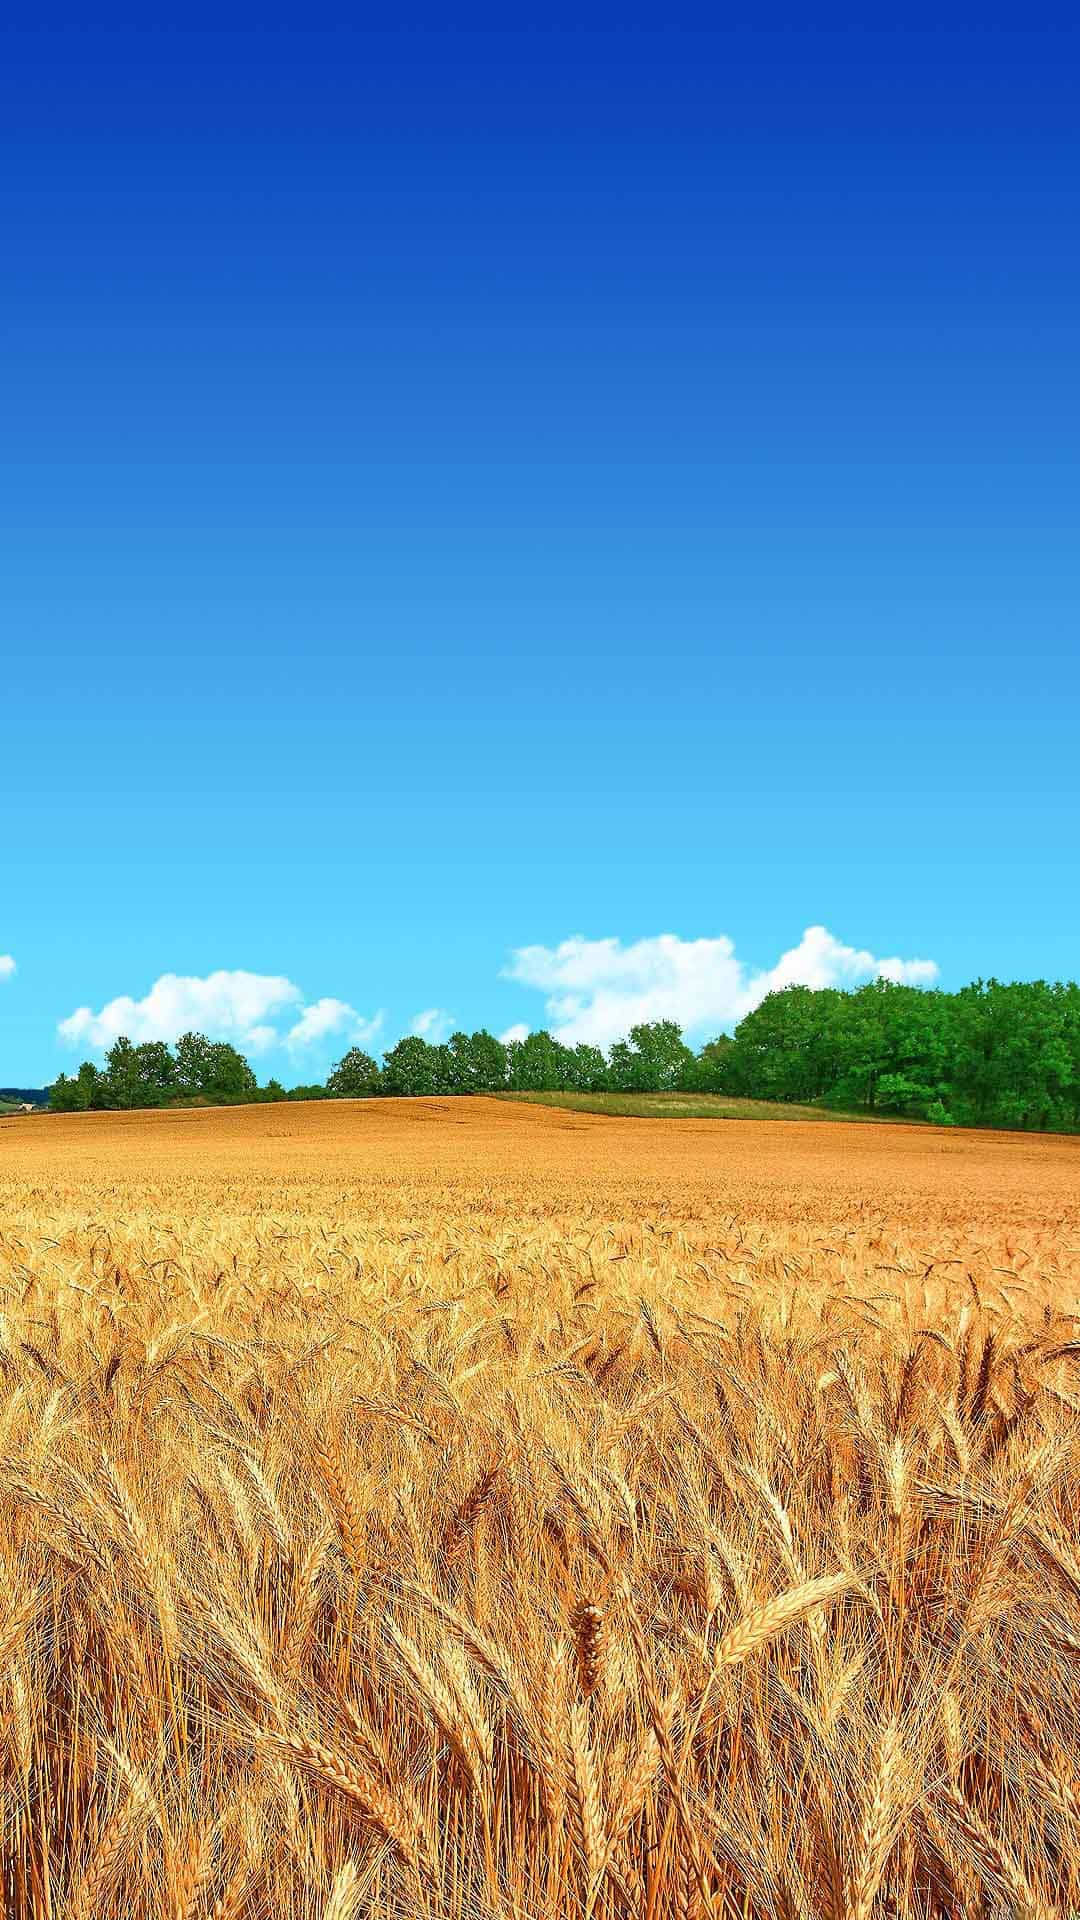 golden-wheat-field-blue-sky-forest-android-wallpaper